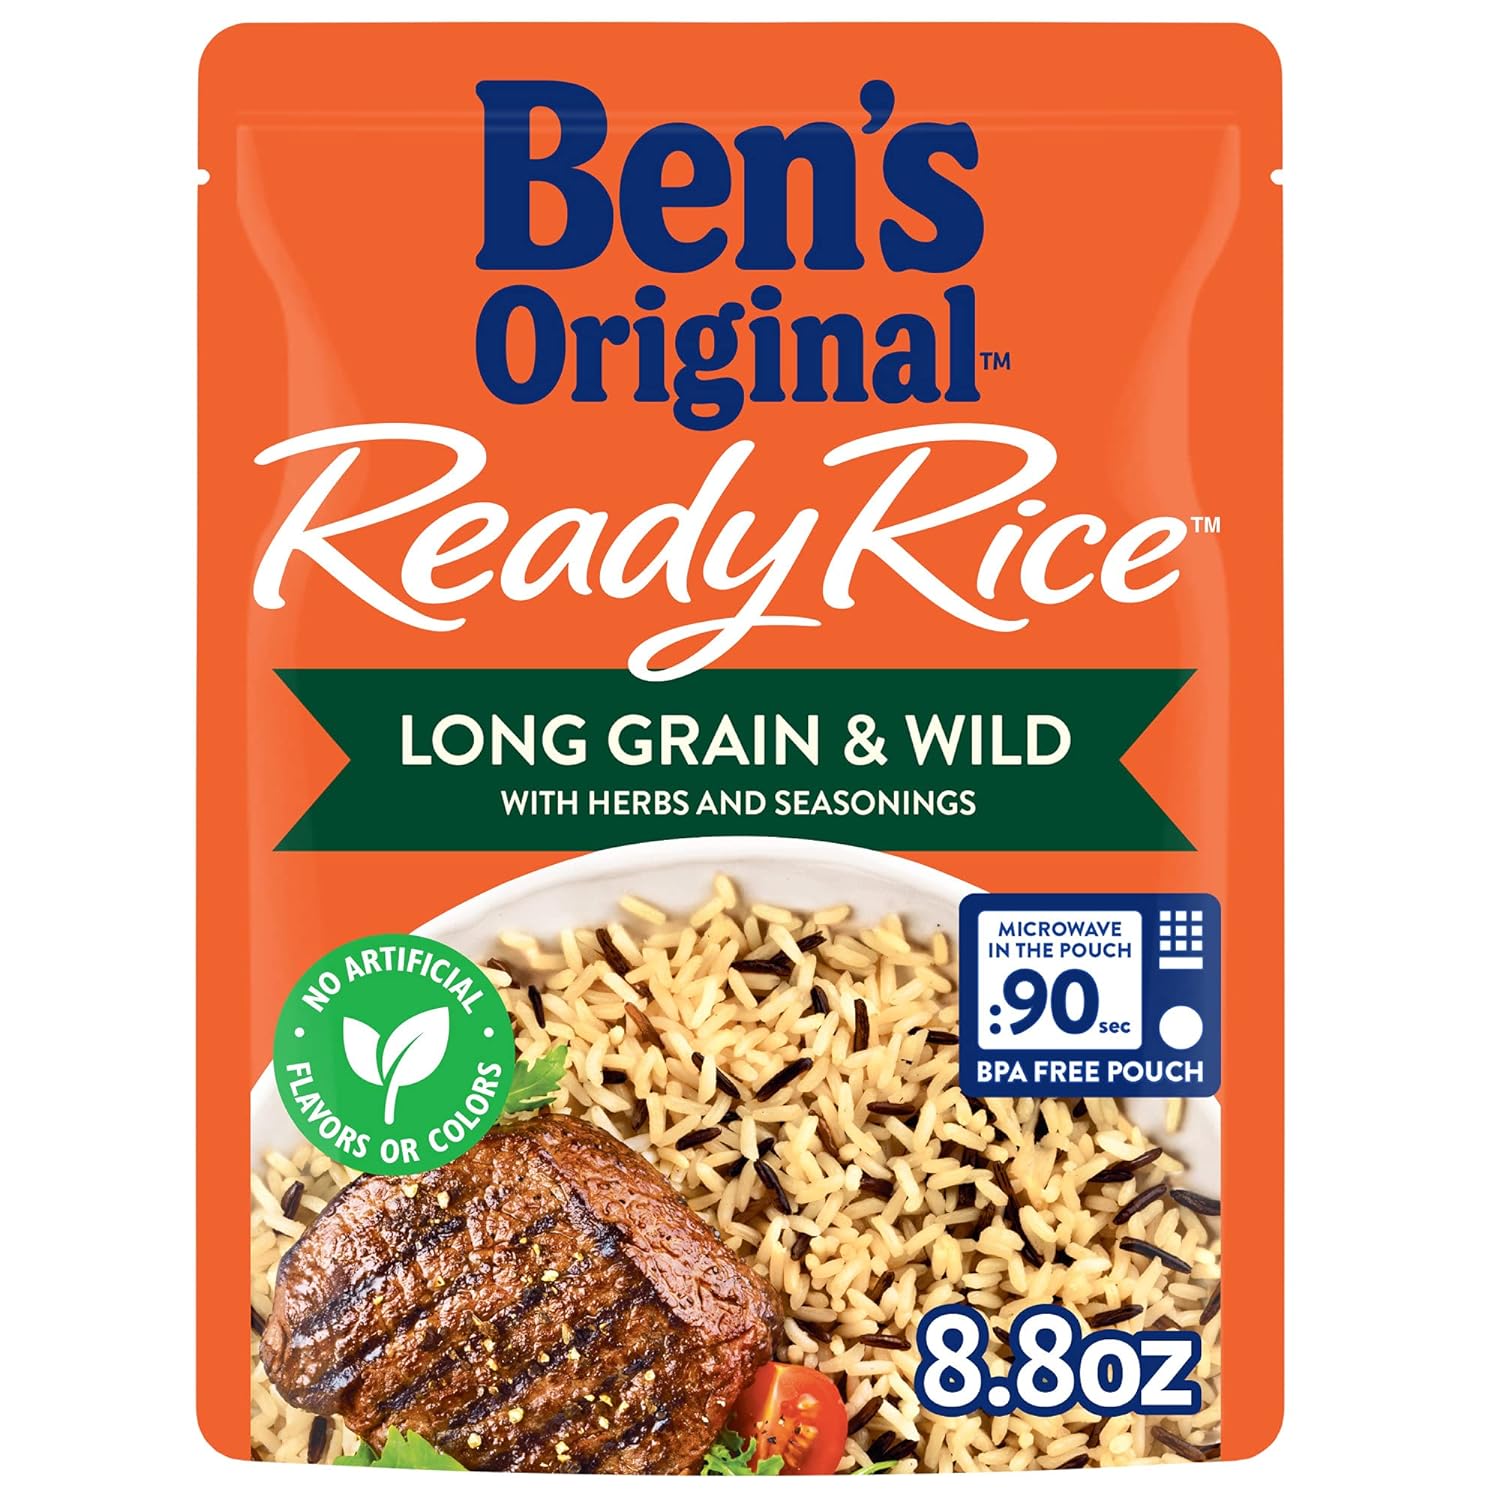 I've purchased this six-pack of Ben's Original Brown Rice multiple times now, and I must say, I am thoroughly impressed with the quality and taste of this product. Now, let me be honest with you  I was a bit skeptical about packaged brown rice at first, as I usually prefer cooking rice from scratch. However, Ben's Original has proven me wrong and won me over with its convenience and flavor.First and foremost, the texture of this brown rice is fantastic. It cooks up perfectly fluffy and doesn't turn mushy, which is a common issue with some other brands. This allows me to create a variety of dishes, from stir-fries to rice bowls, with confidence that the rice will hold its shape and not become a sticky mess.What really sets Ben's Original apart is the taste. It has a nutty, earthy flavor that feels authentic and pairs wonderfully with a wide range of ingredients. It adds depth and richness to my meals, making them more satisfying and delicious. Plus, the aroma that fills my kitchen while cooking is just amazing.The convenience of having these pre-packaged portions cannot be overstated. It saves me time and effort in the kitchen, especially on busy weeknights when I want a quick and healthy side dish. The six-pack size is perfect for a family like mine, and the resealable bags keep the rice fresh for an extended period. One of the most significant advantages of Ben's Original Brown Rice is its health benefits in my opinion. It's a wholesome source of whole grains and is naturally gluten-free. Plus, it's low in fat and sodium, which aligns perfectly with my goal of eating healthier.Now another brand of rice that I recommend and love is Seeds of Change here.https://amzn.to/3NiHzFaIt's another option that I find very healthy, but still incredibly tasty.